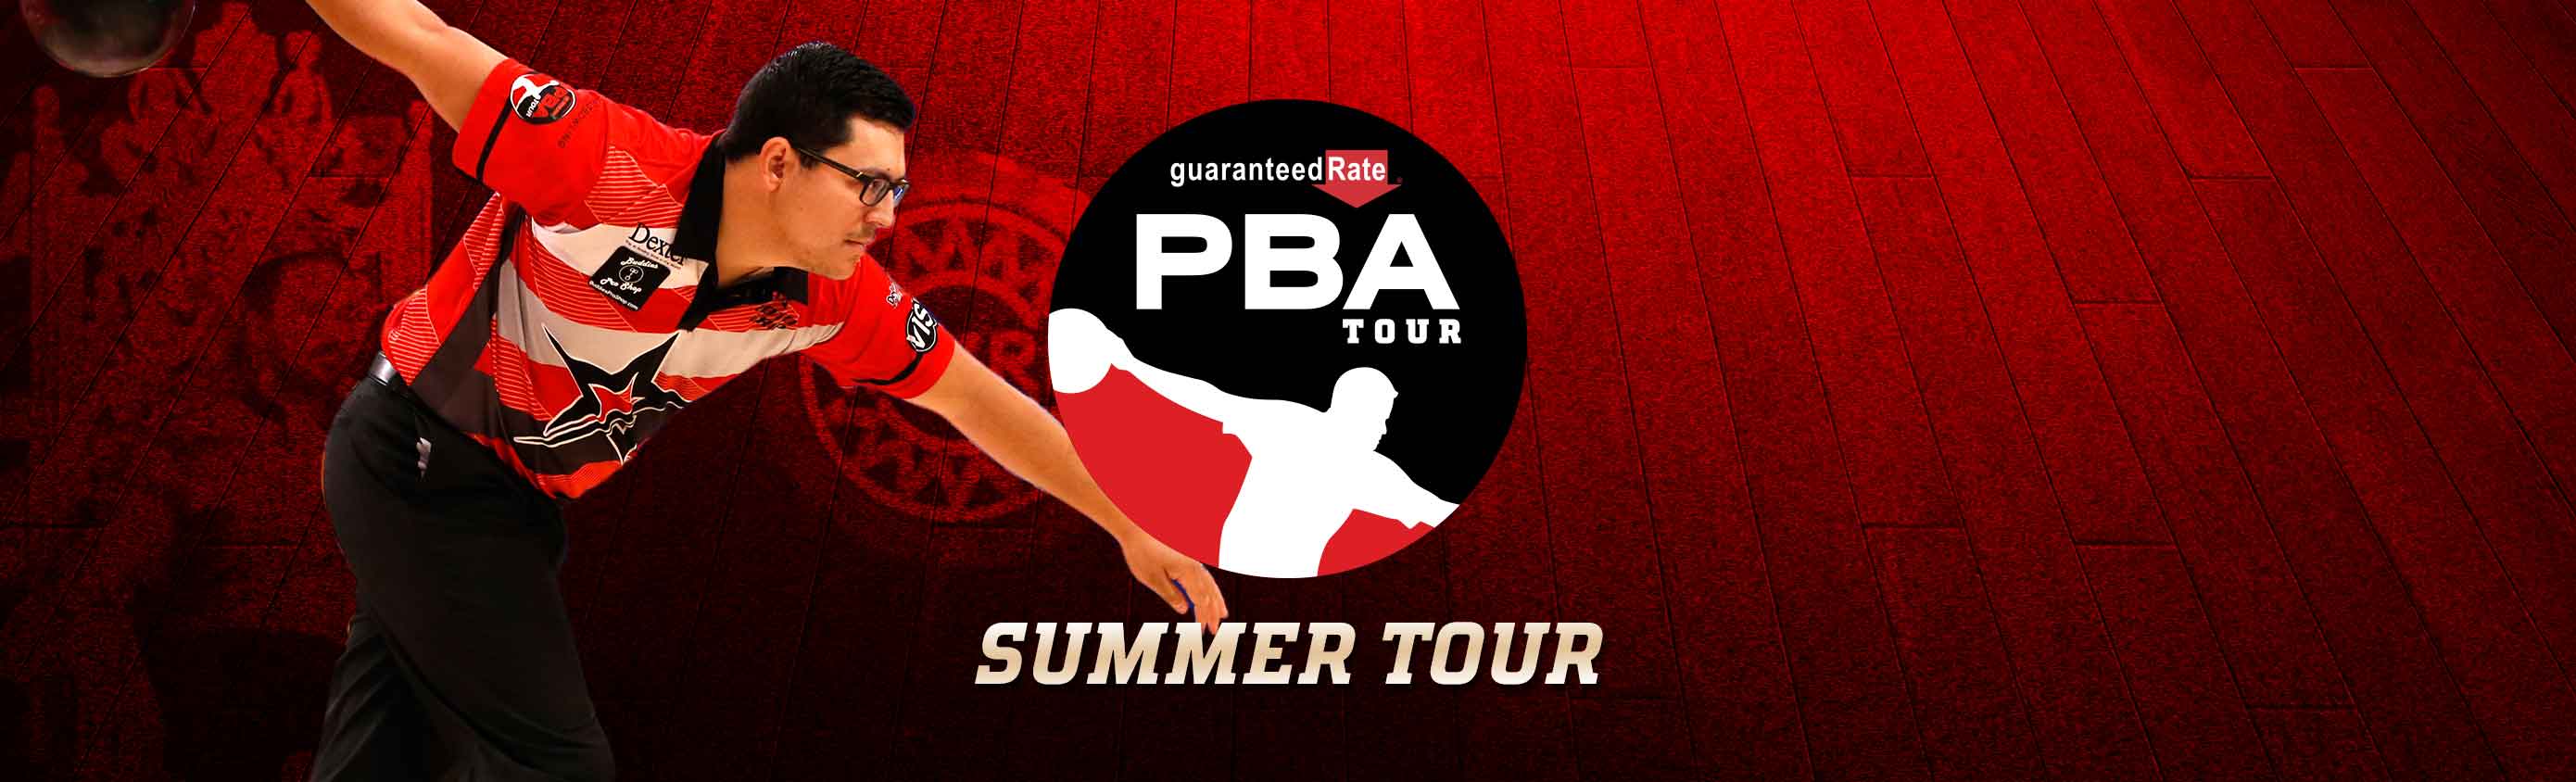 PBA Summer Tour Logo with a bowler playing 